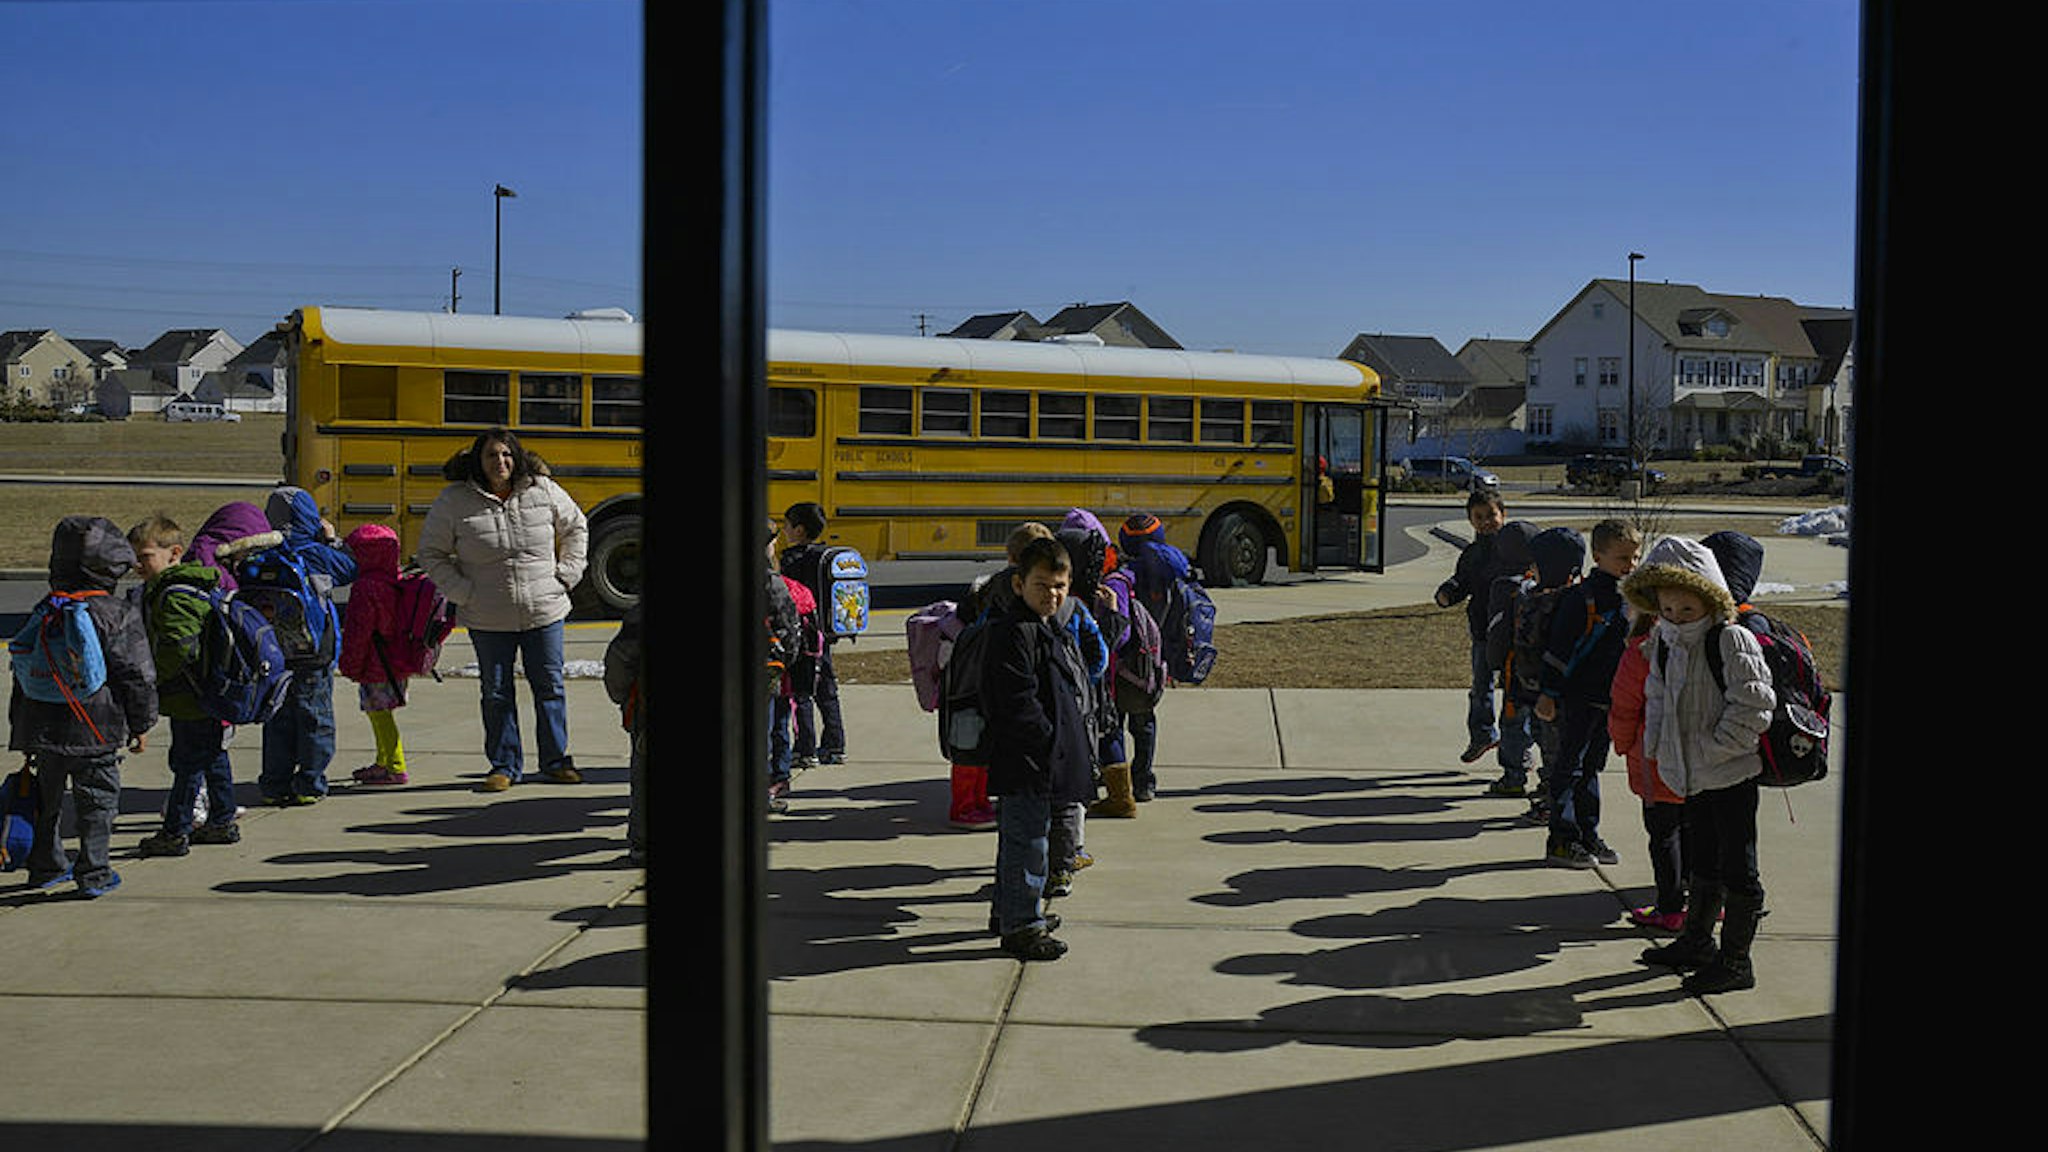 Kindergarteners prepare to leave Creighton's Corner Elementary School after a half day on Friday, February 28, 2014, in Ashburn, VA.